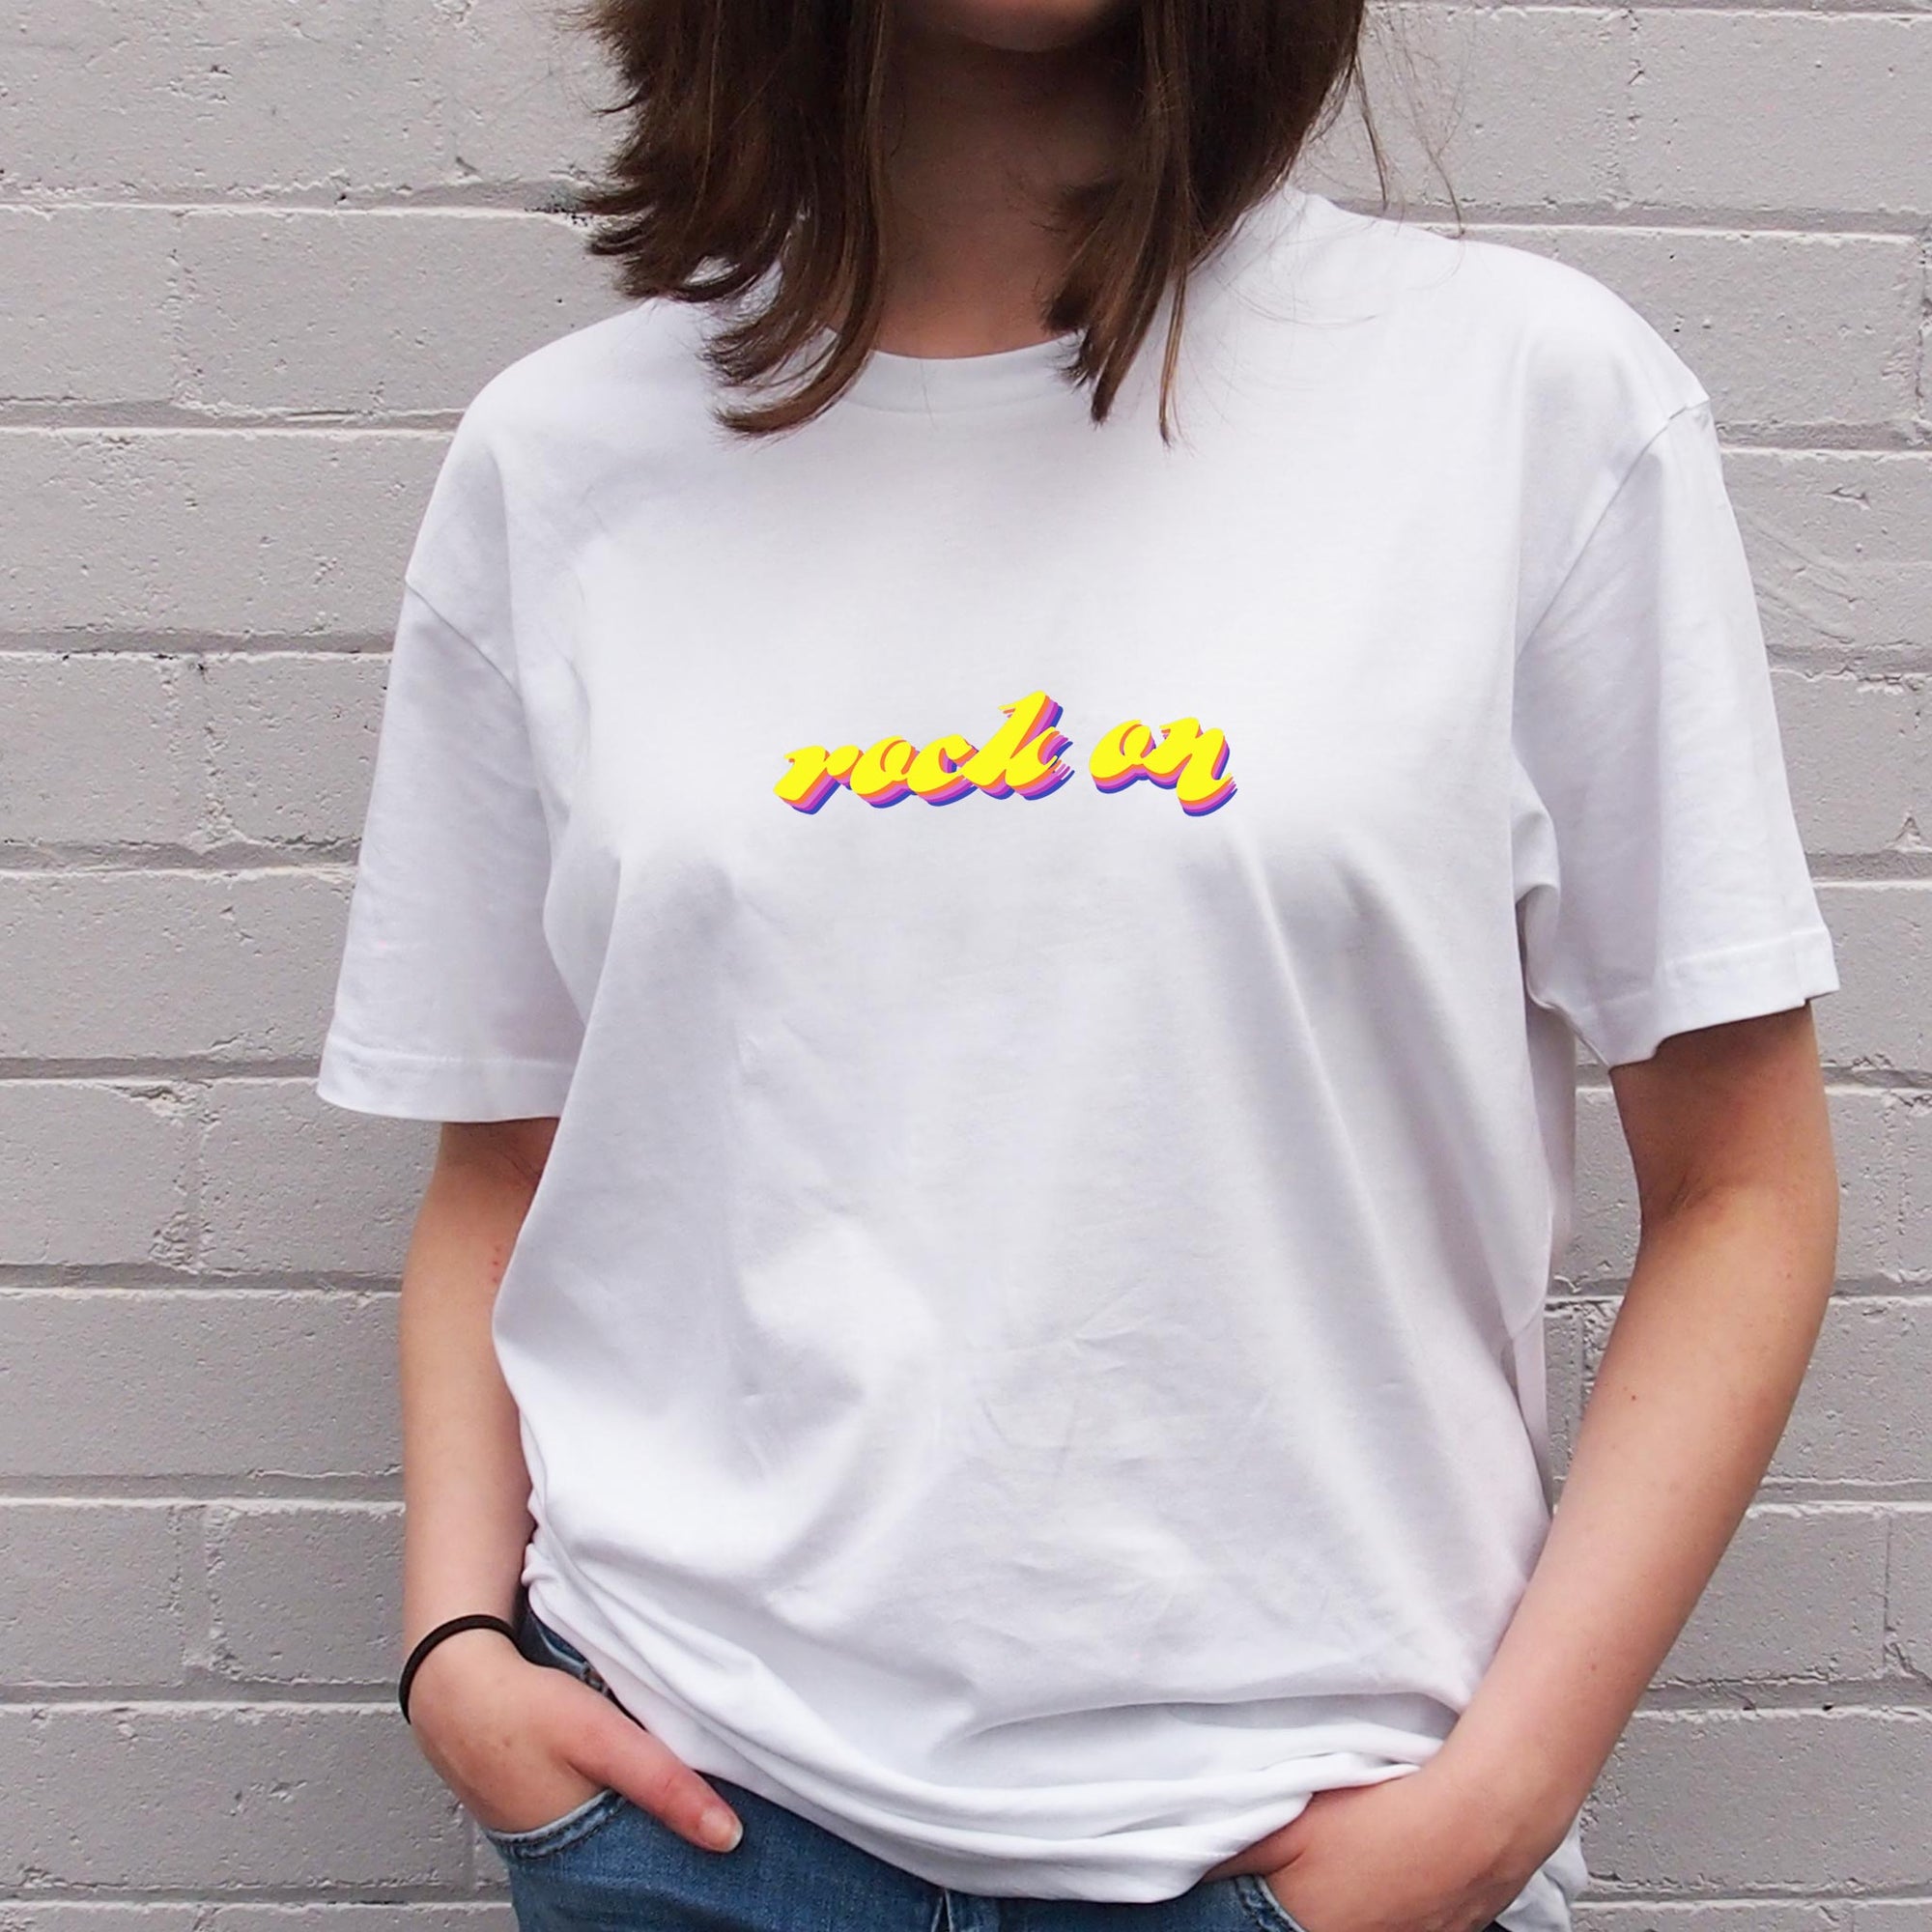 I'm With The Band® Rock On T-shirt with bright multi-colour print on white T being worn by a faceless woman standing against a white painted brick wall